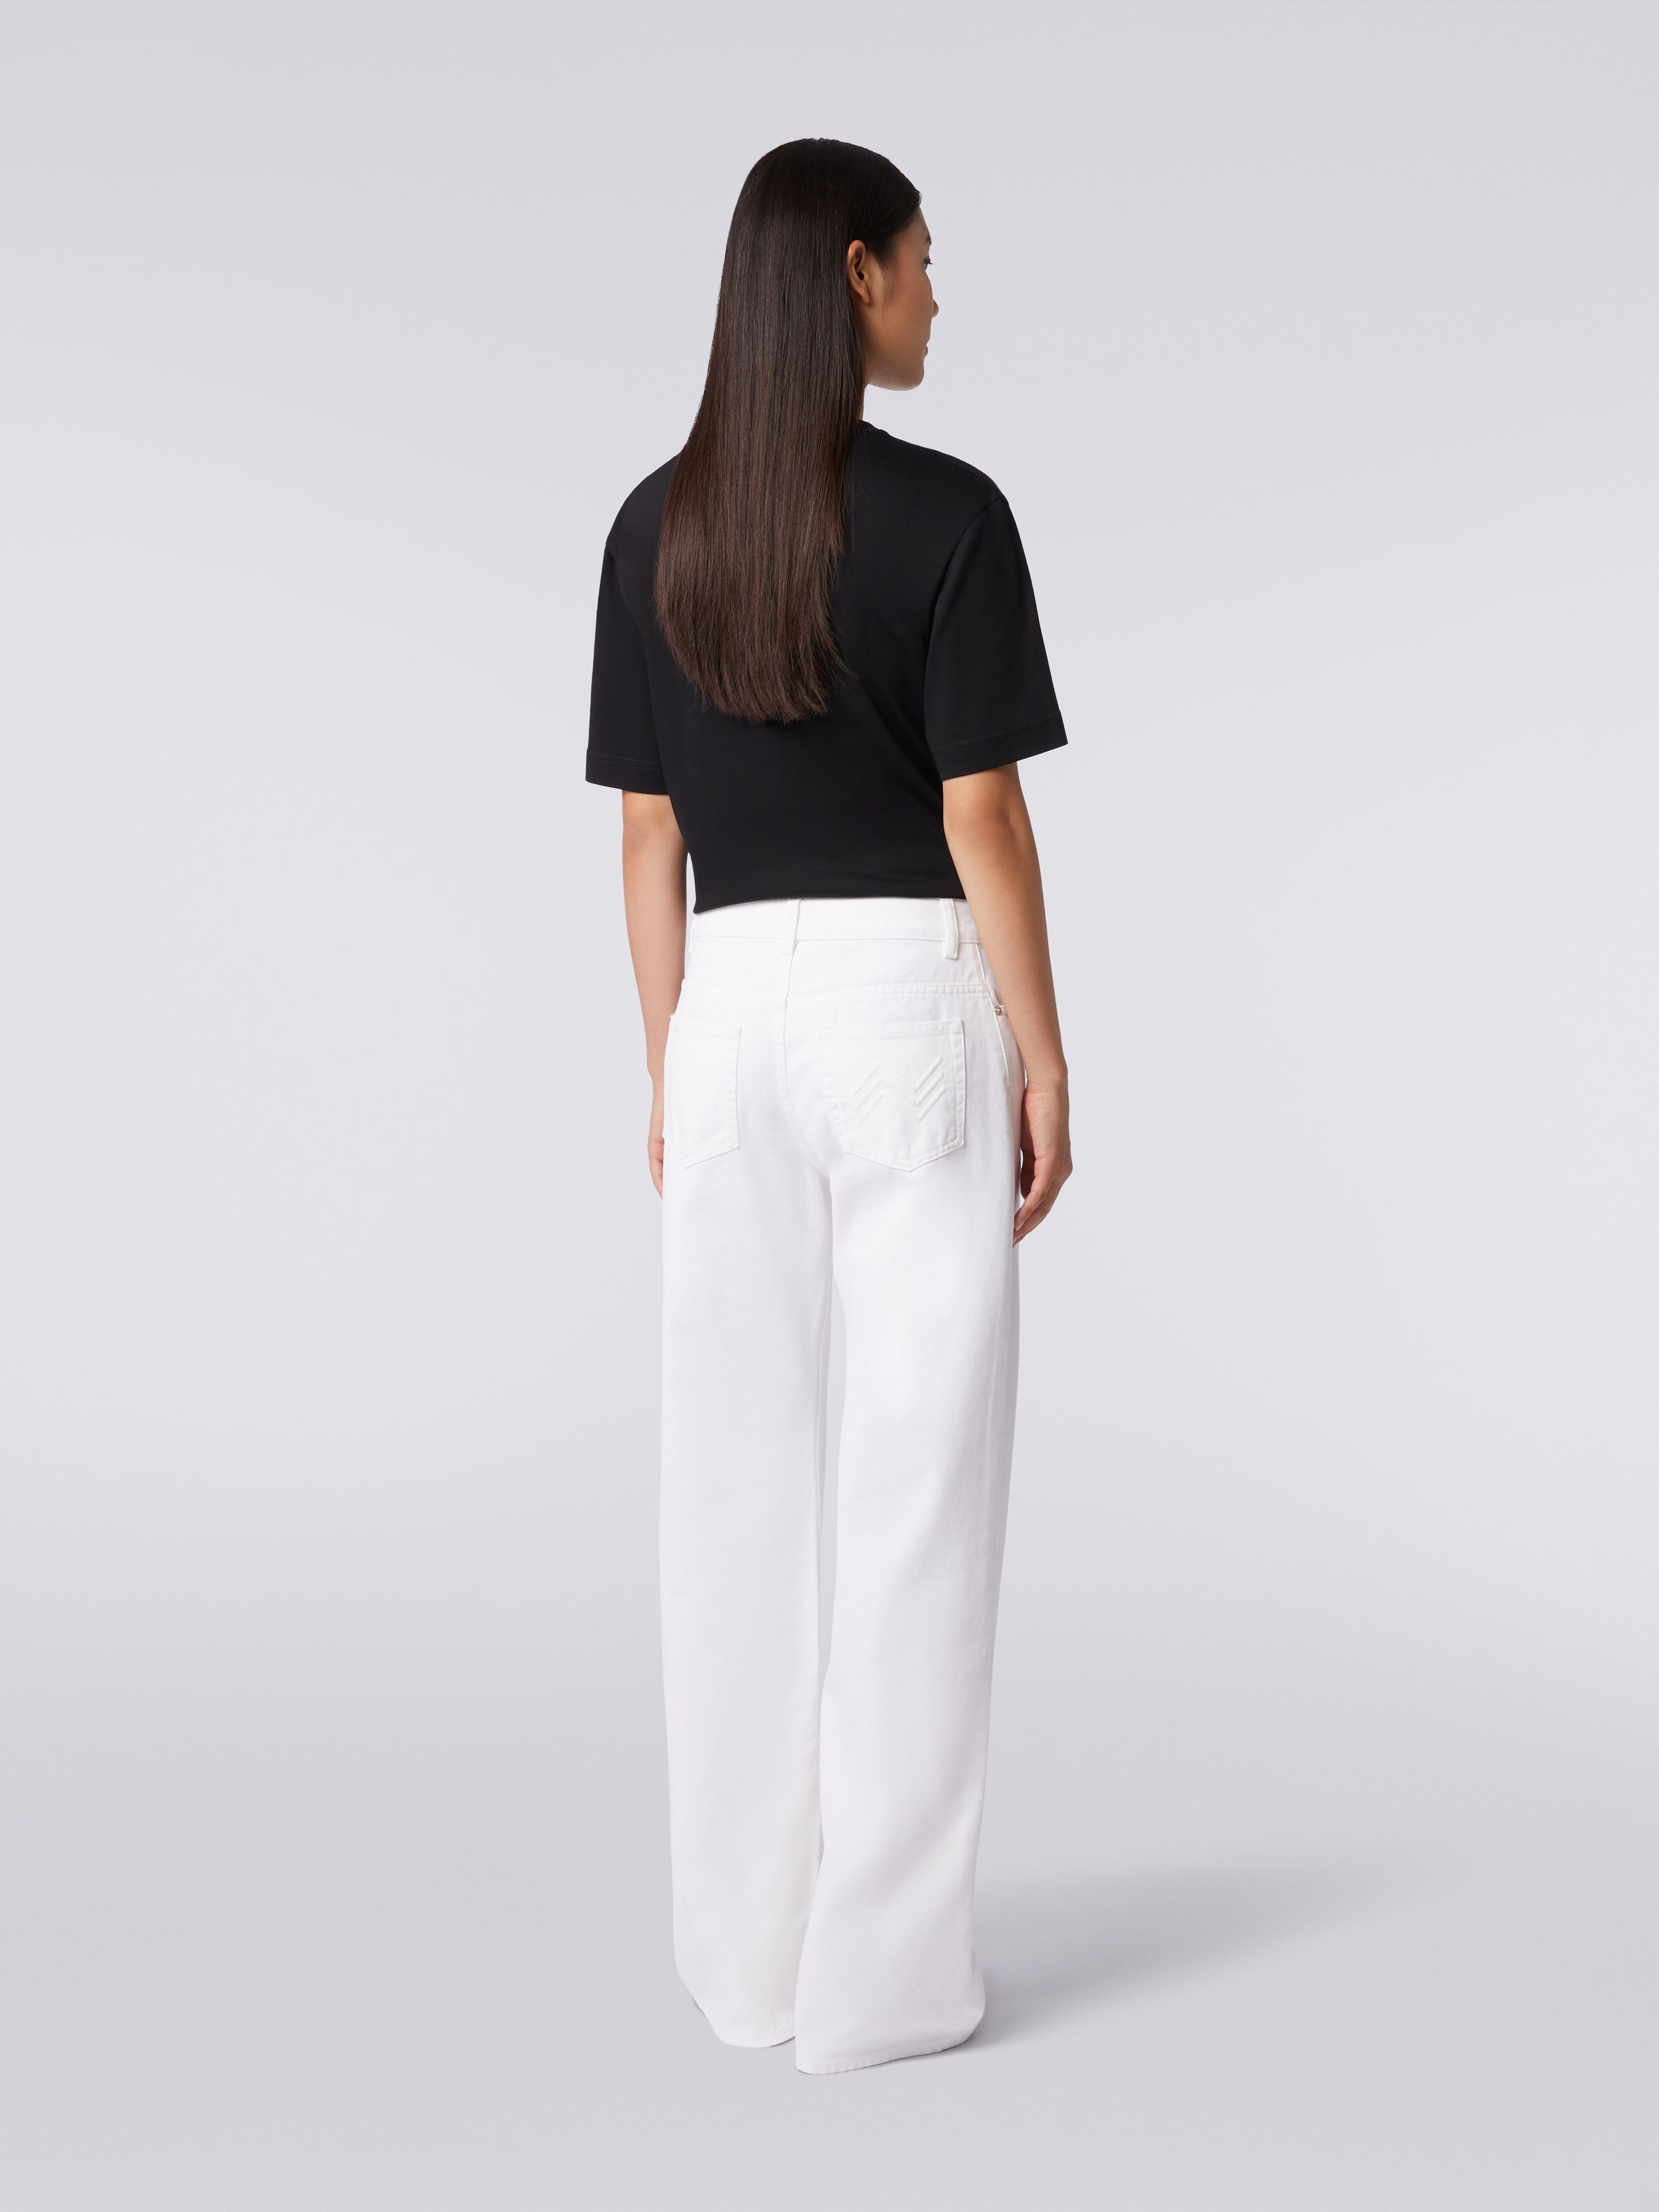 Five-pocket palazzo trousers with zigzag embroidery on the back pocket  , White  - 3